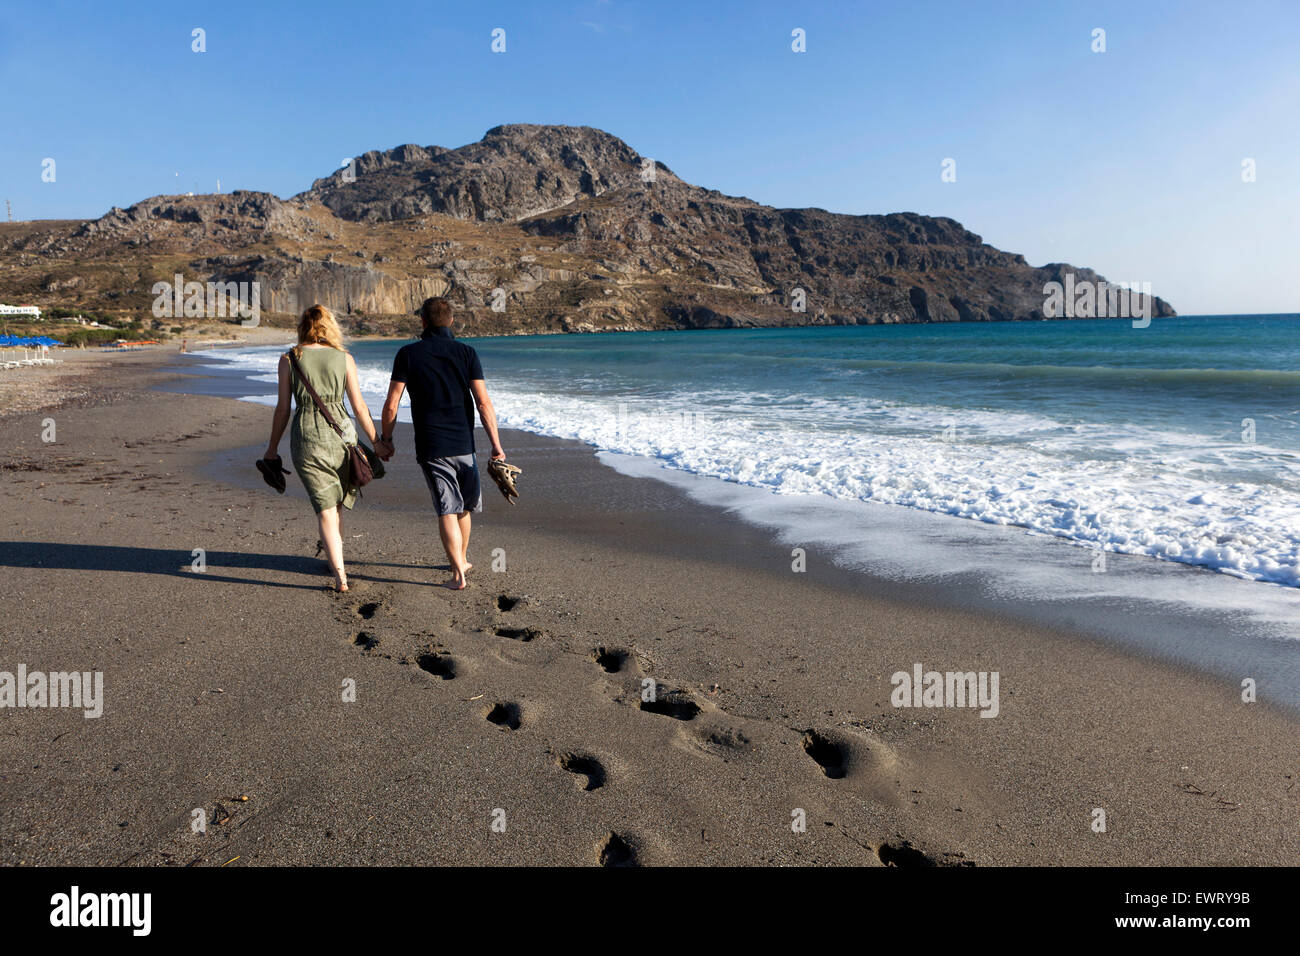 Footsteps in sand, Couple walking on the beach Plakias Crete, Greece beach rear view Stock Photo